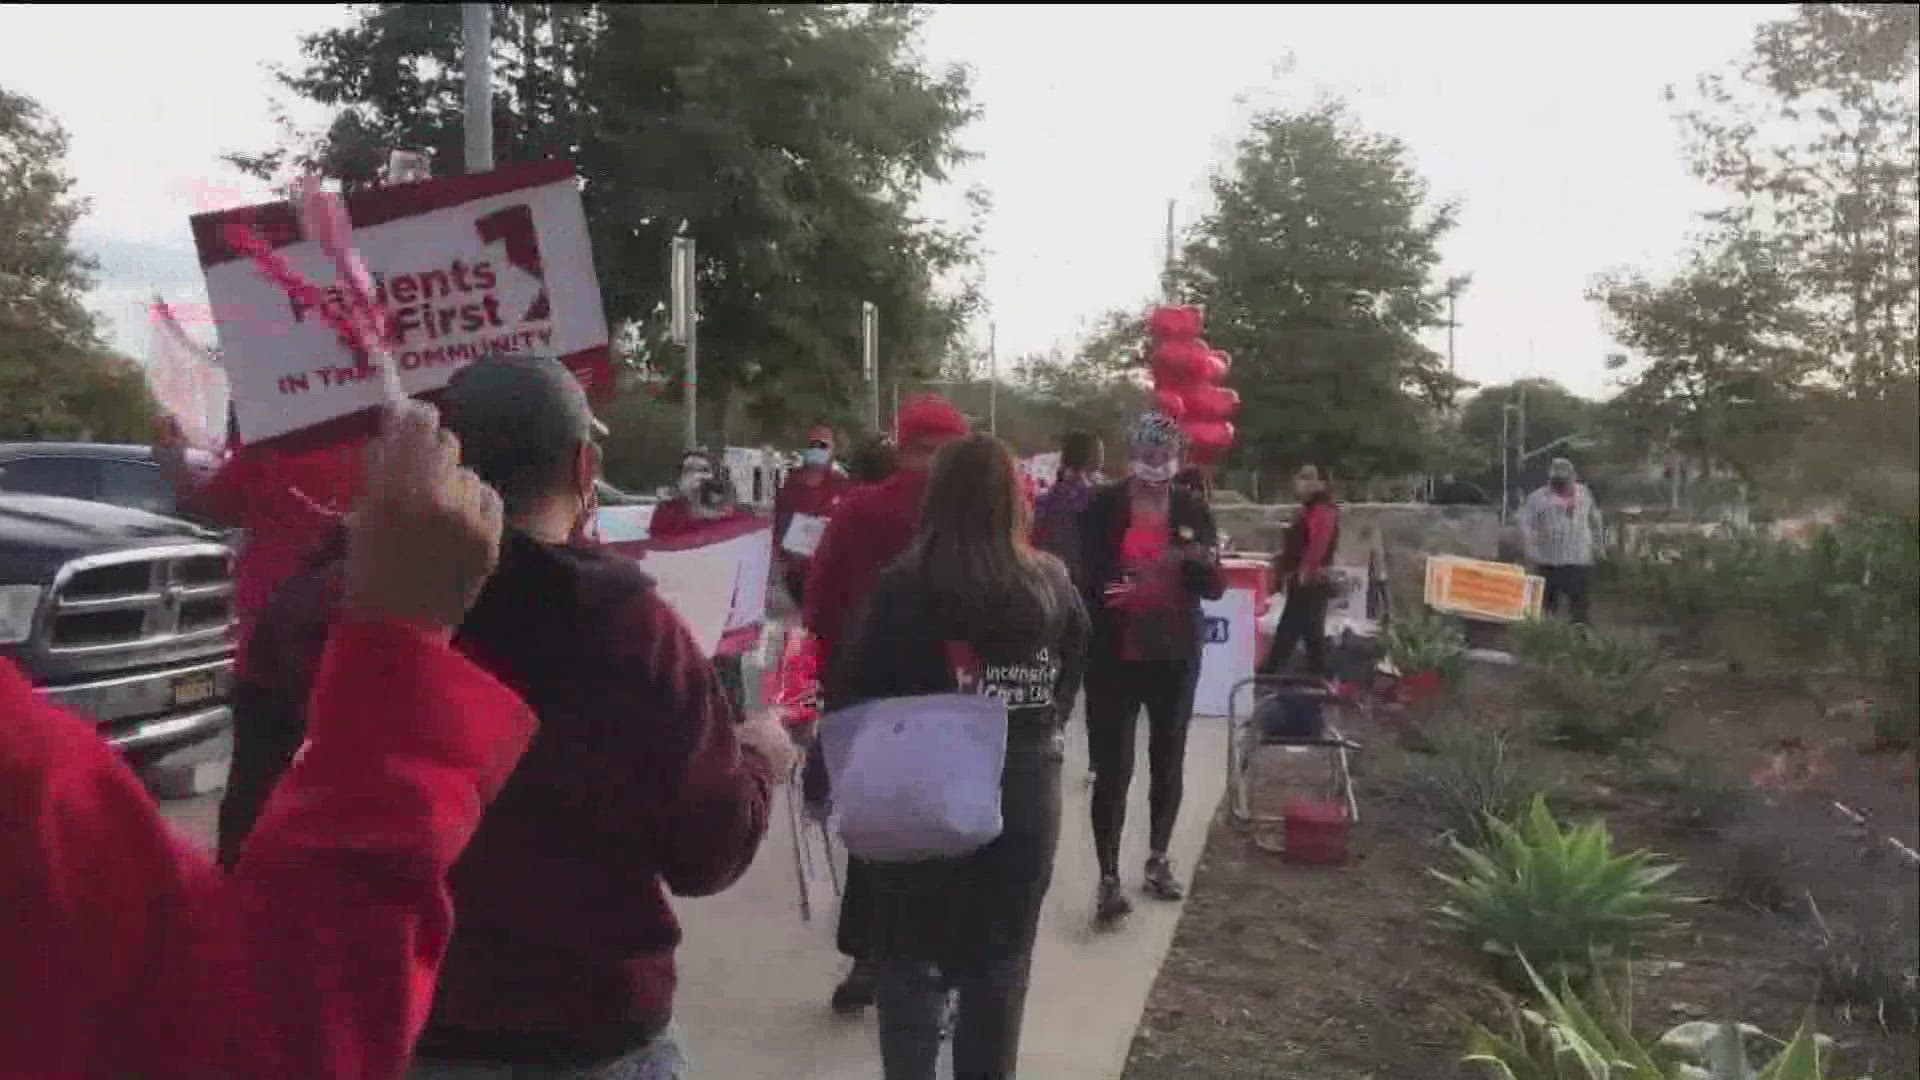 Healthcare workers say they have been completely disregarded as Palomar Health continues with staff shortages, layoffs, outsourcing, and unsafe patient conditions.